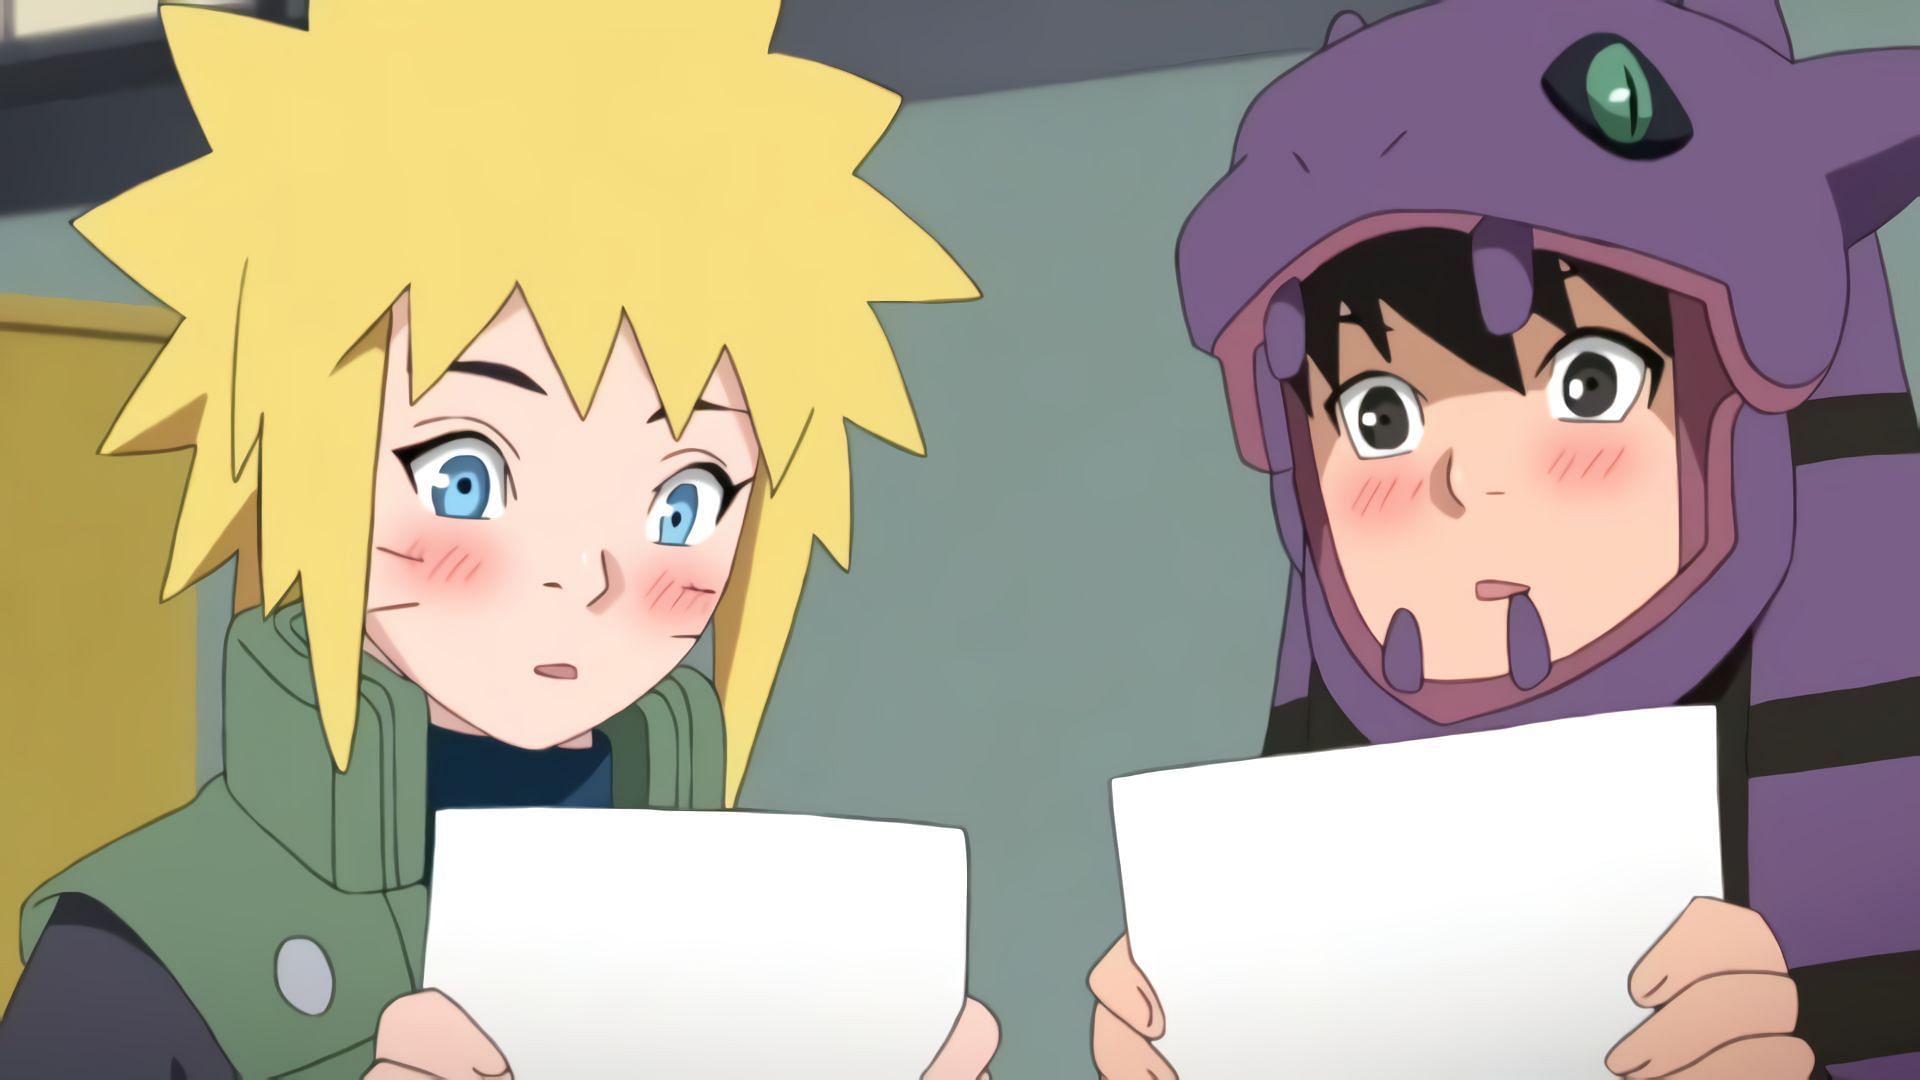 Super overdue Boruto episode 267 review 🙈 (better late than never